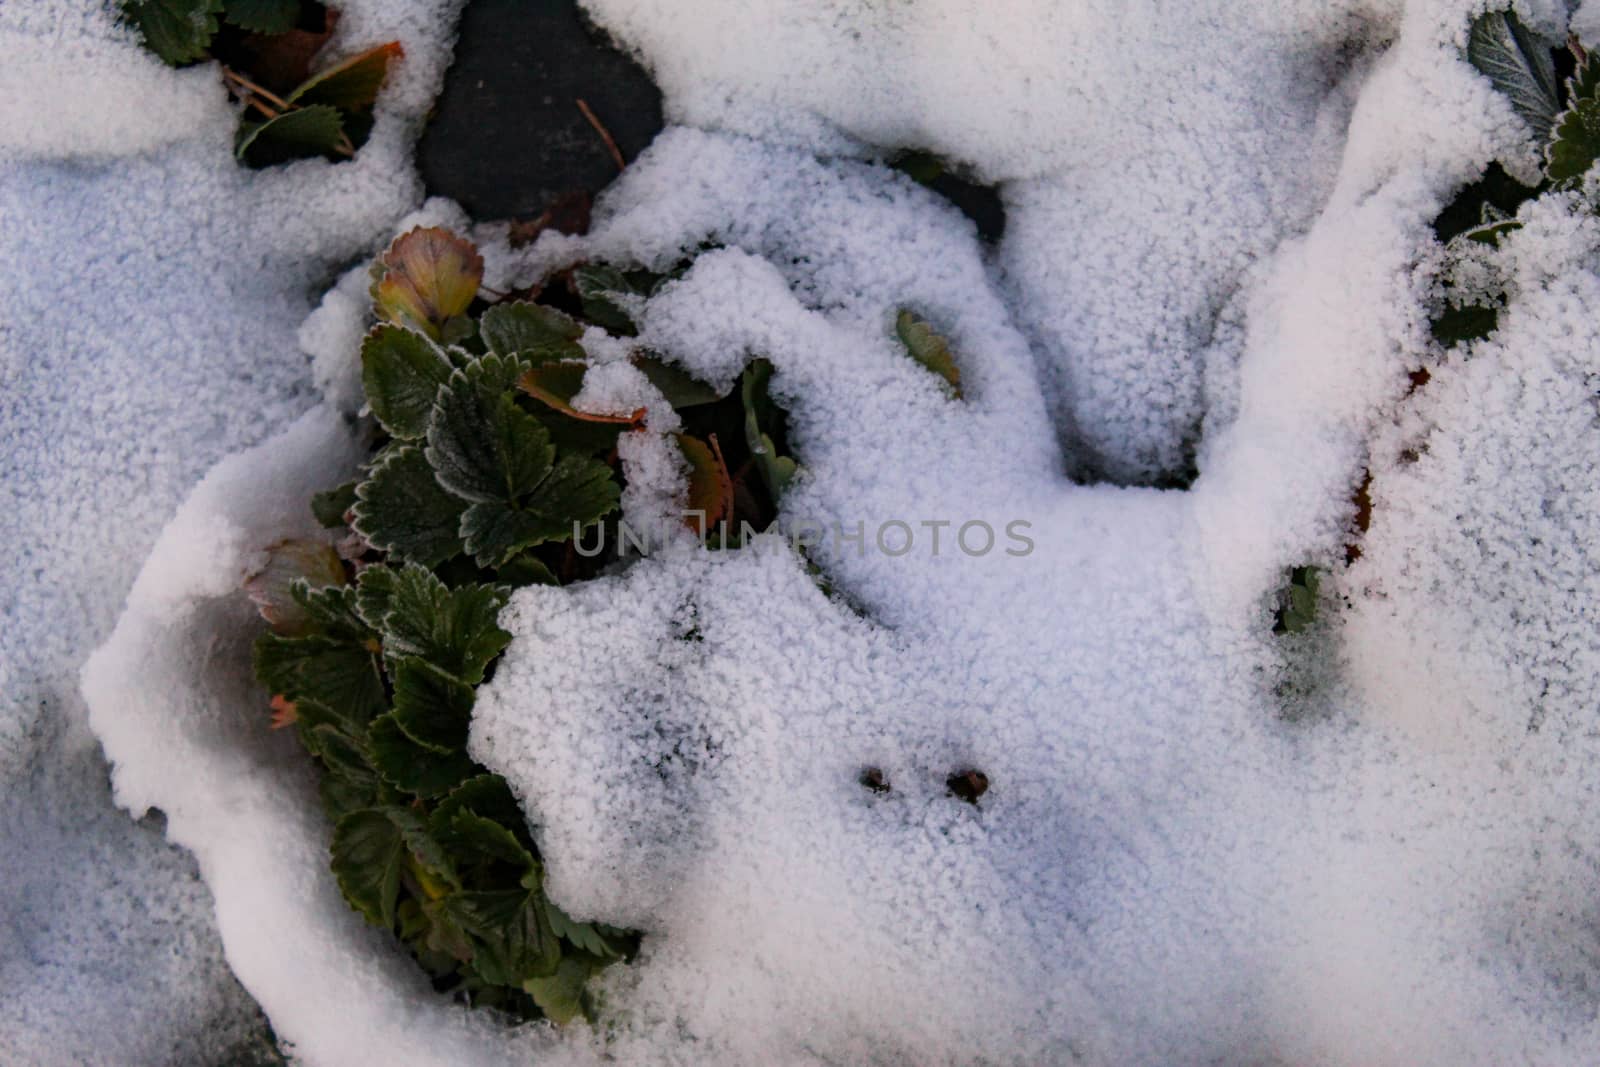 Snow fell on strawberry plants. A snow-covered strawberry plant, a group of strawberry leaves protruding above the snow in a row. Zavidovici, Bosnia and Herzegovina.